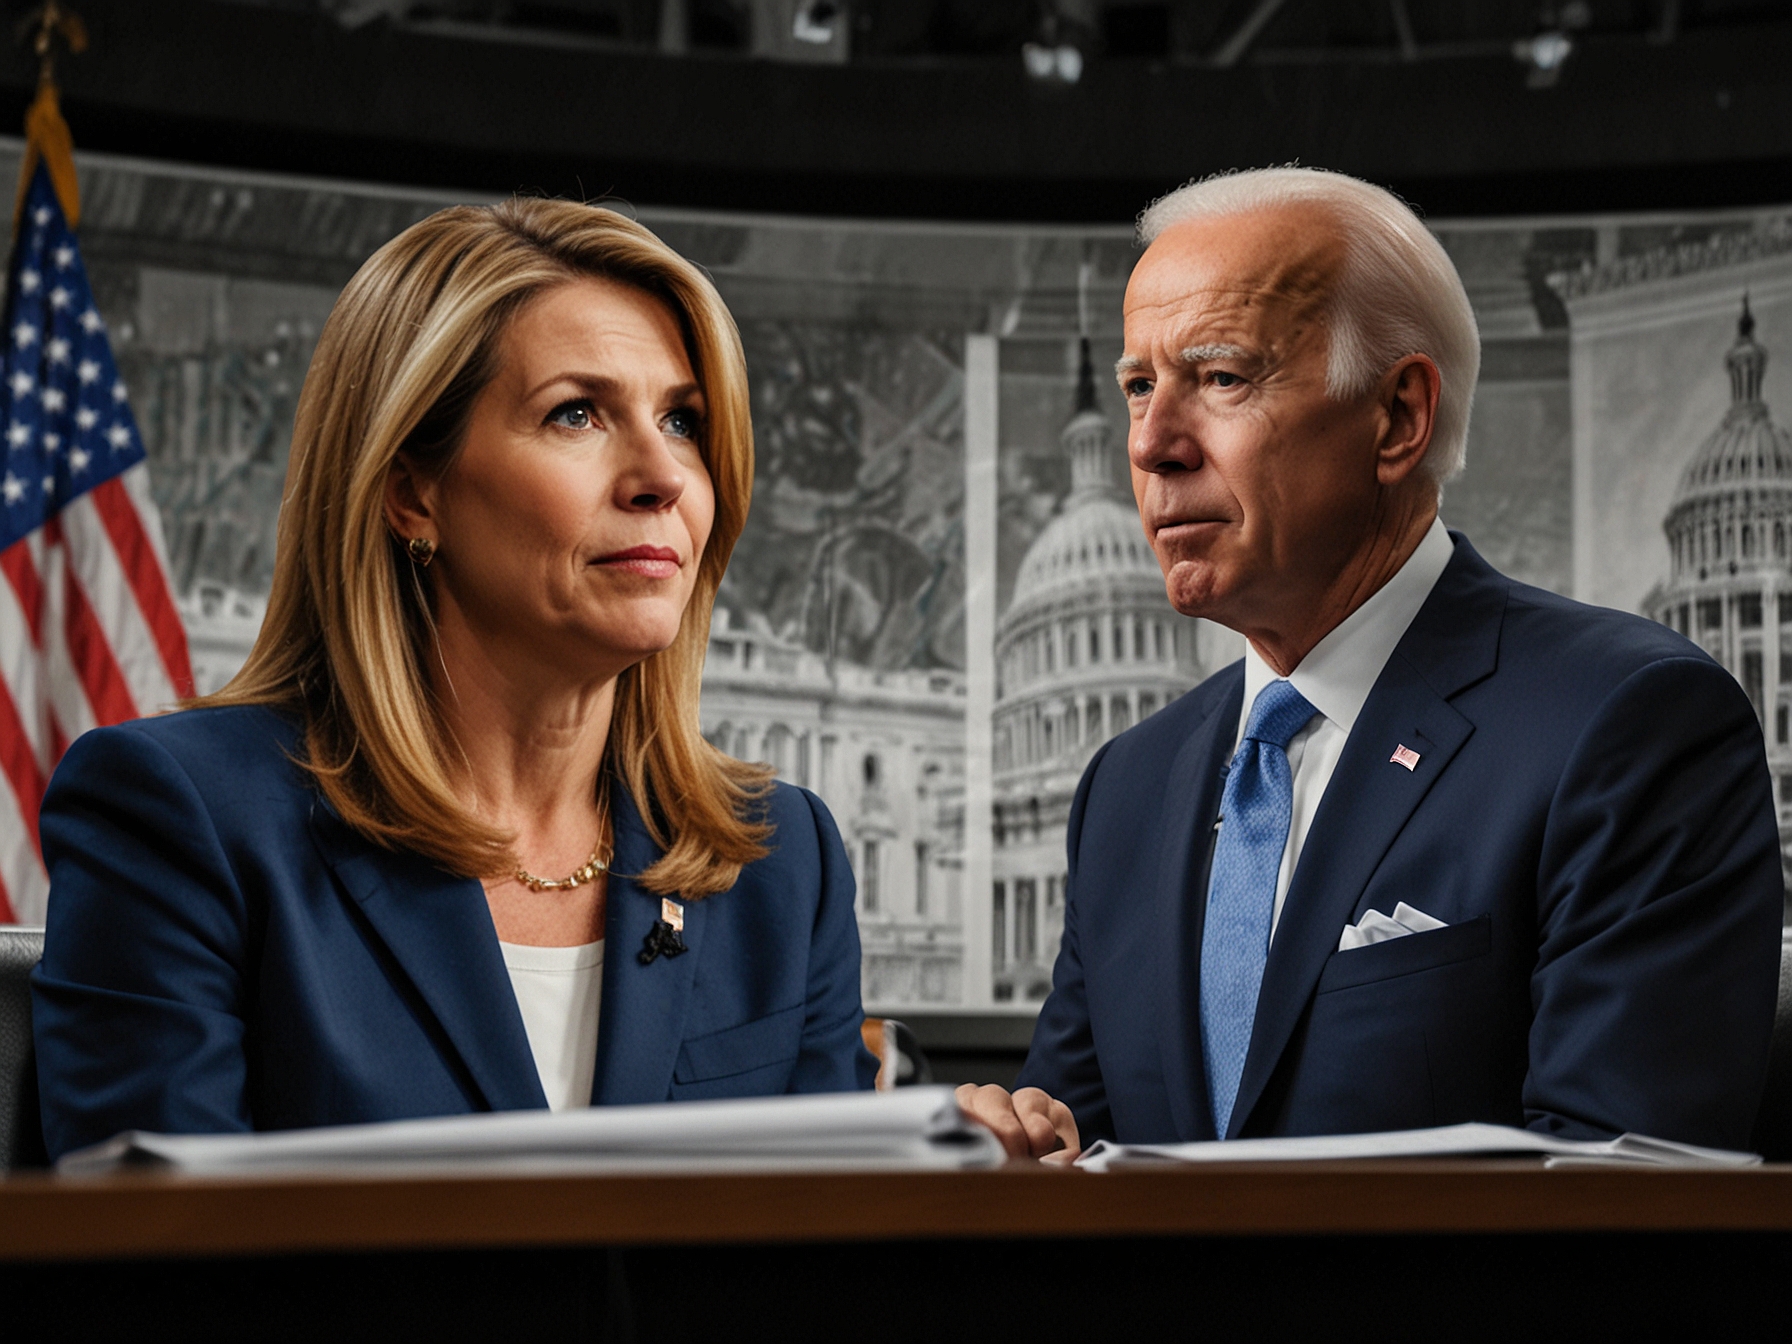 A split-screen image featuring MSNBC host Nicole Wallace and DHS boss Alejandro Mayorkas, symbolizing the media's conflicting narratives about Biden's leadership and mental fitness.